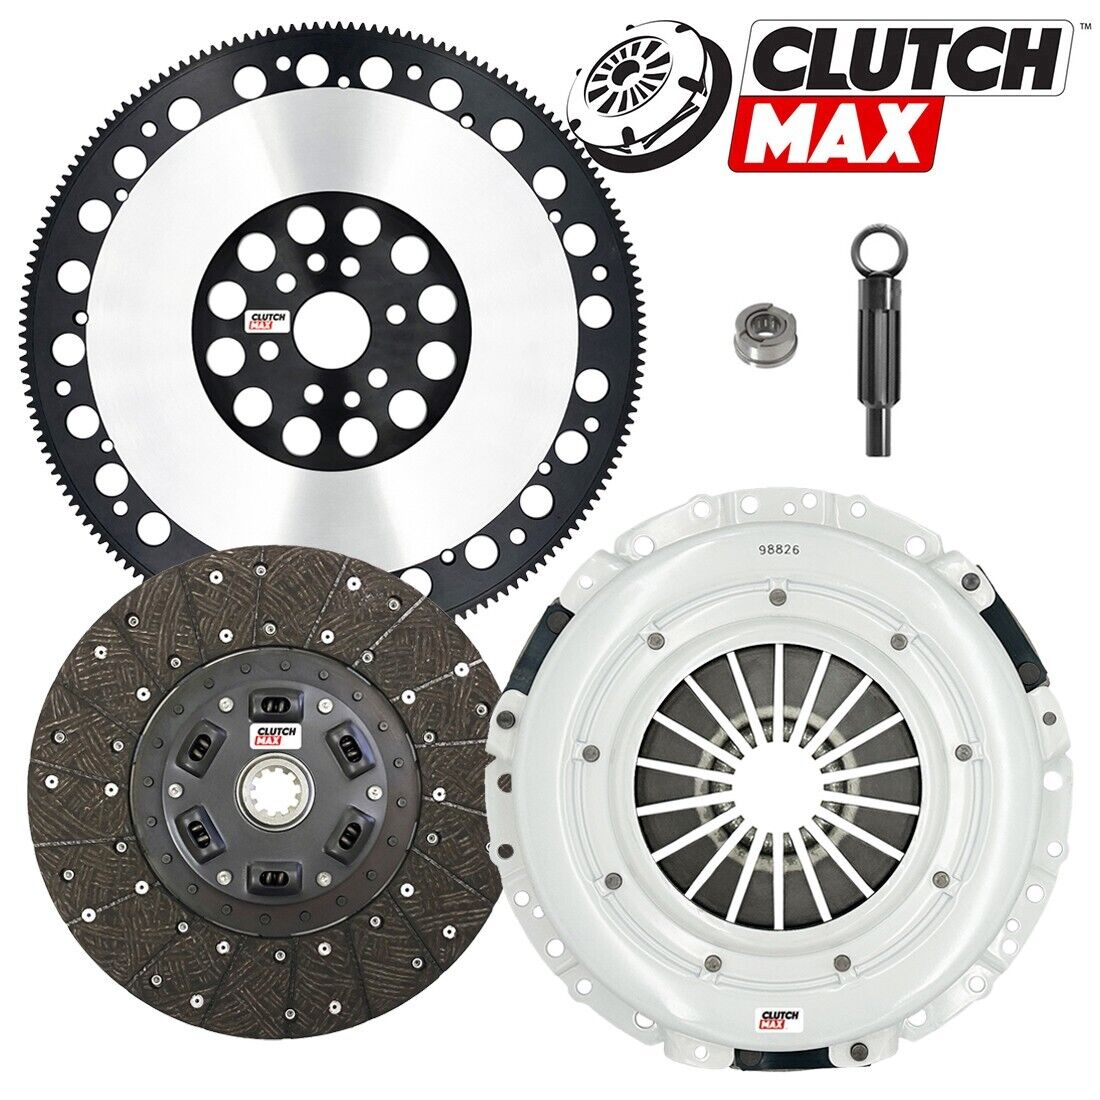 CM STAGE 2 CLUTCH KIT + RACE FLYWHEEL for 2005-2010 FORD MUSTANG 4.6L GT SHELBY